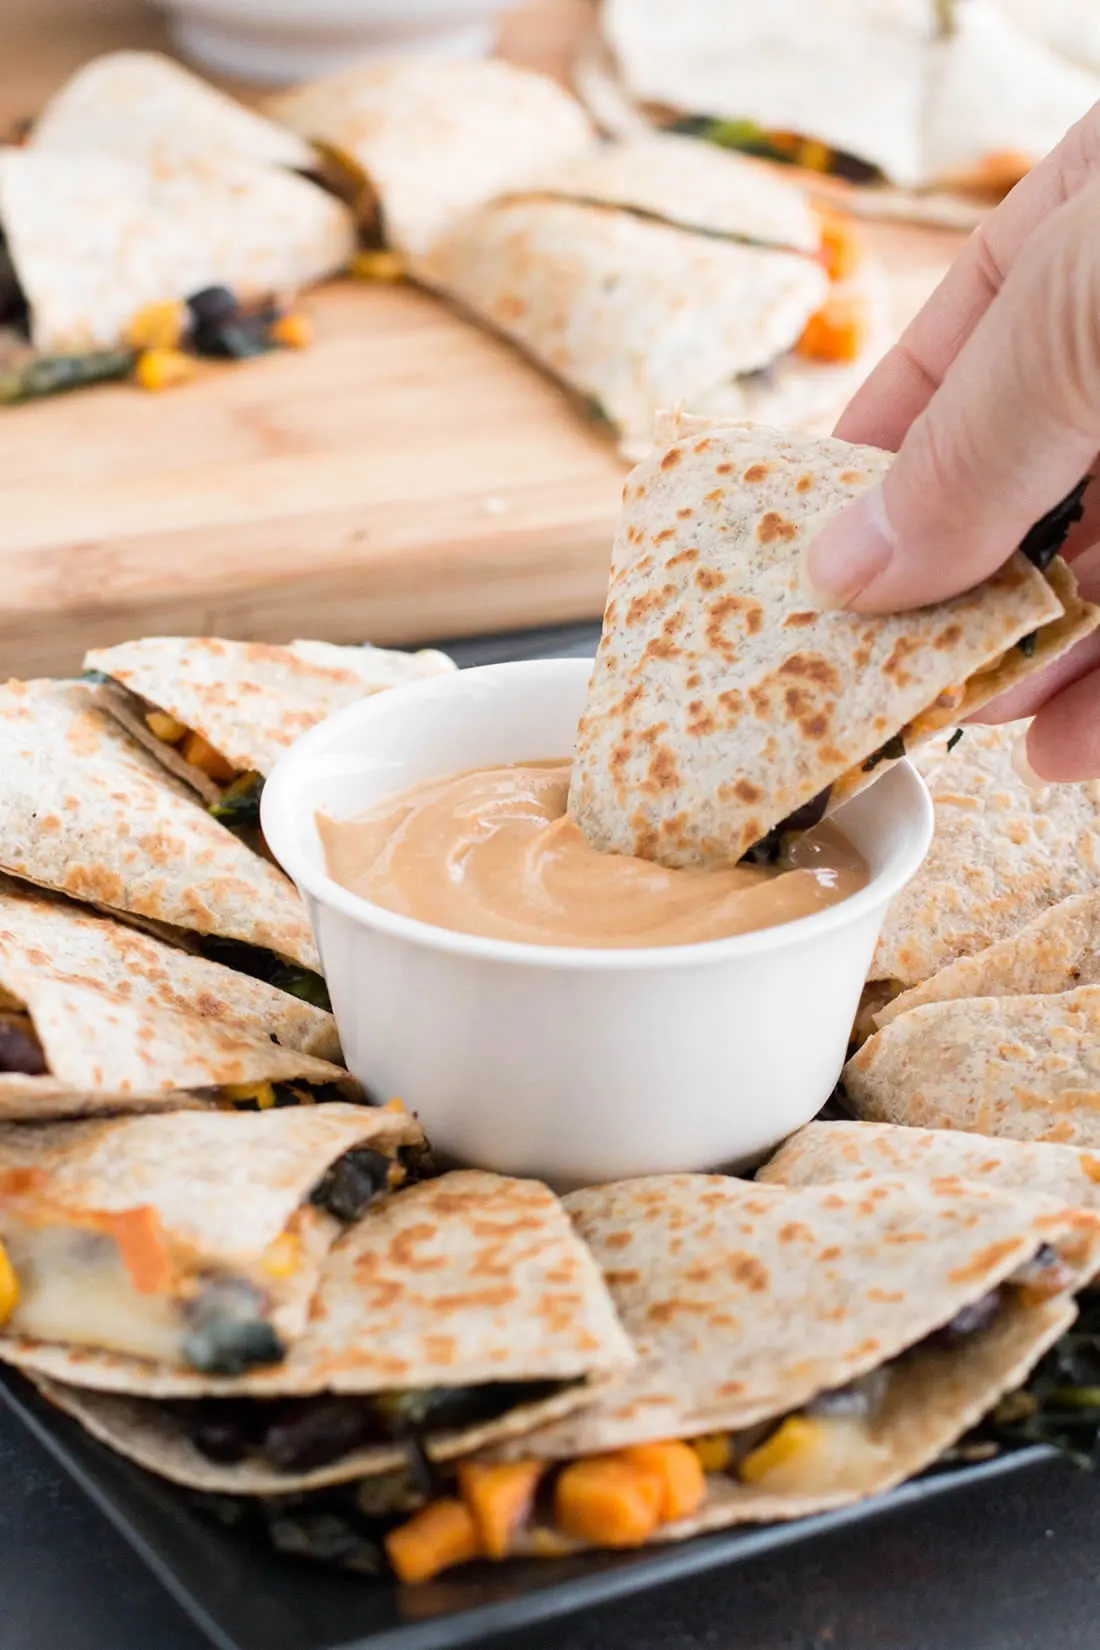 Kale, Sweet Potato, Black Bean Quesadillas are chock full of veggies and are paired with an unexpected, but delicious light and creamy barbeque dip.